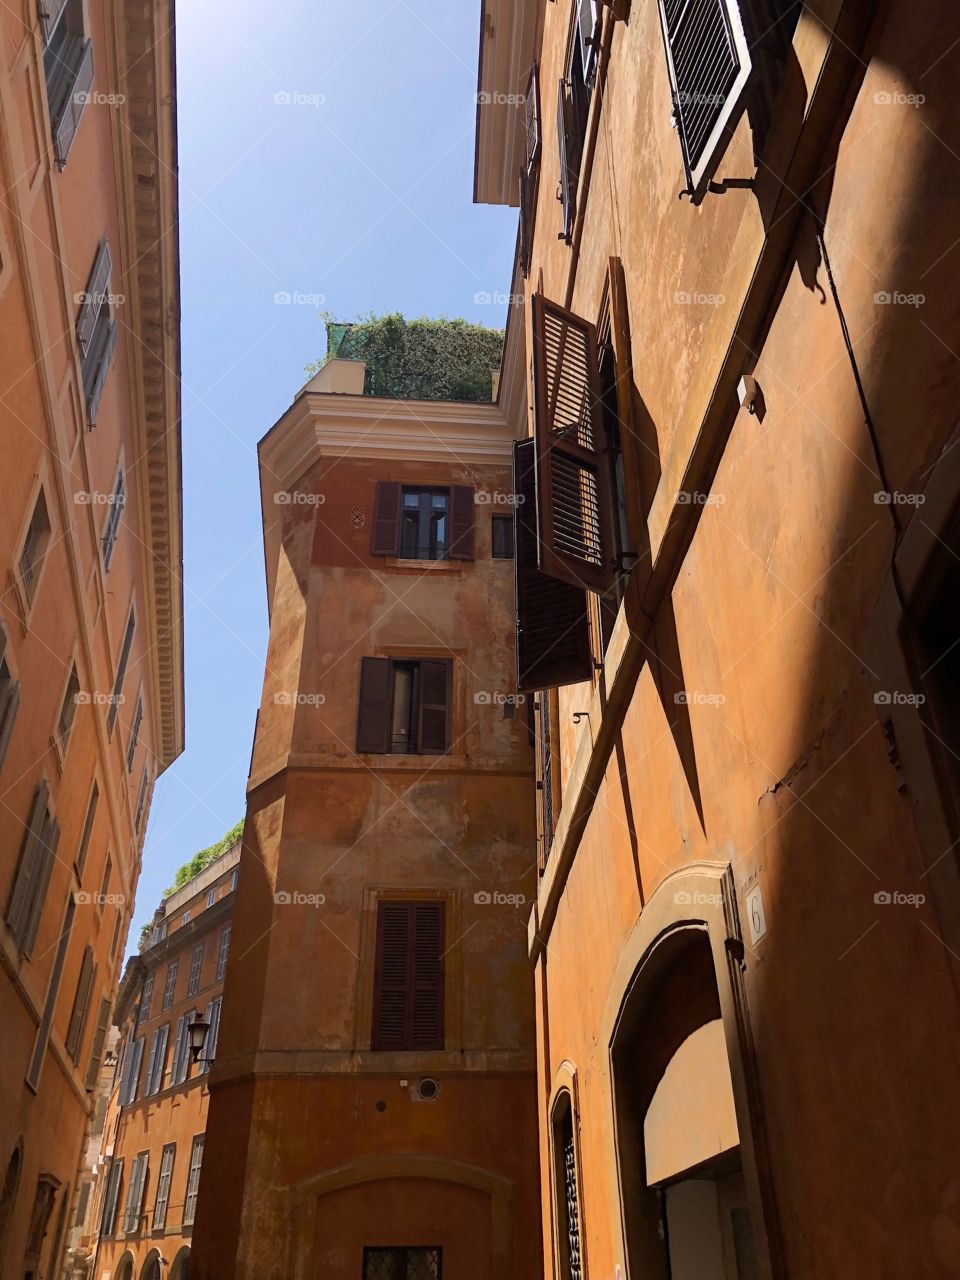 Open window on a hot day in Rome